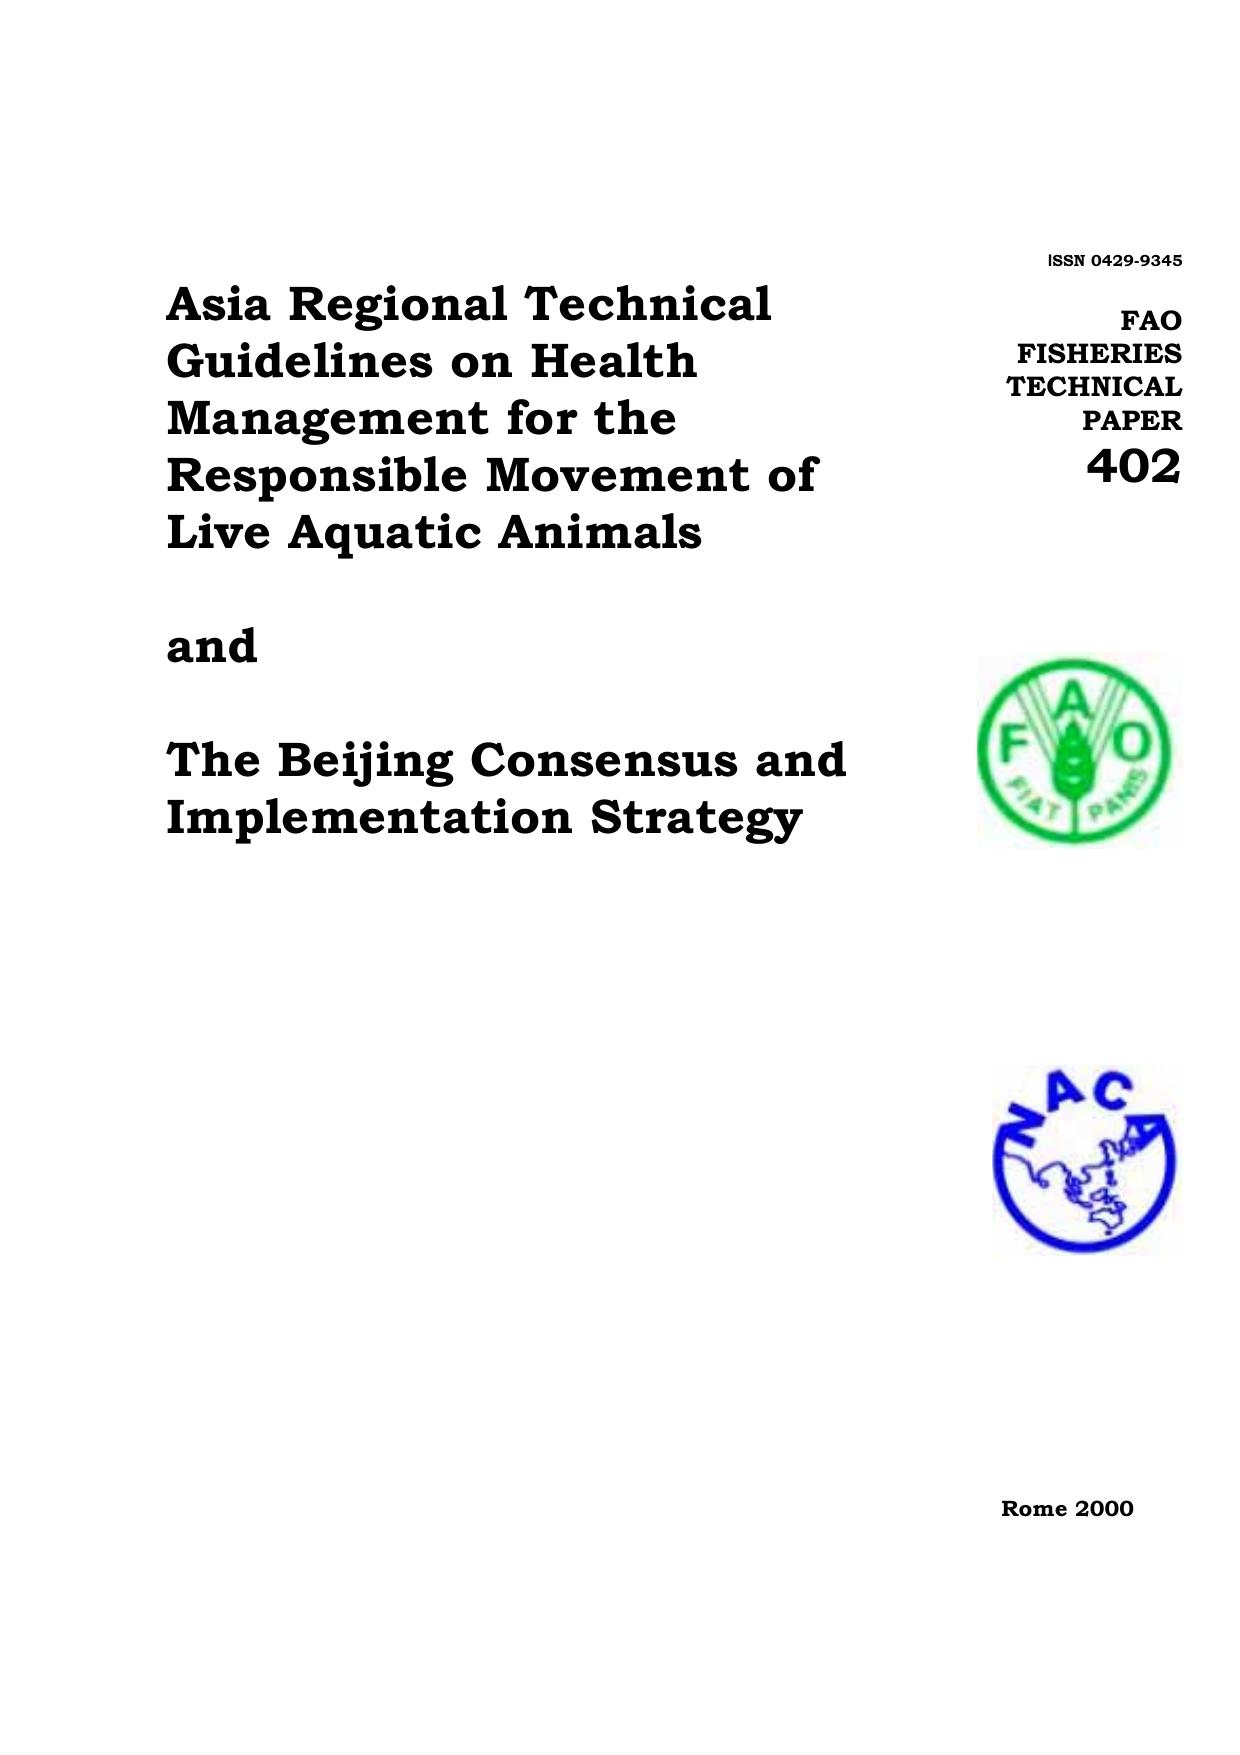 Microsoft Word - Asia regional technical guidelines.doc